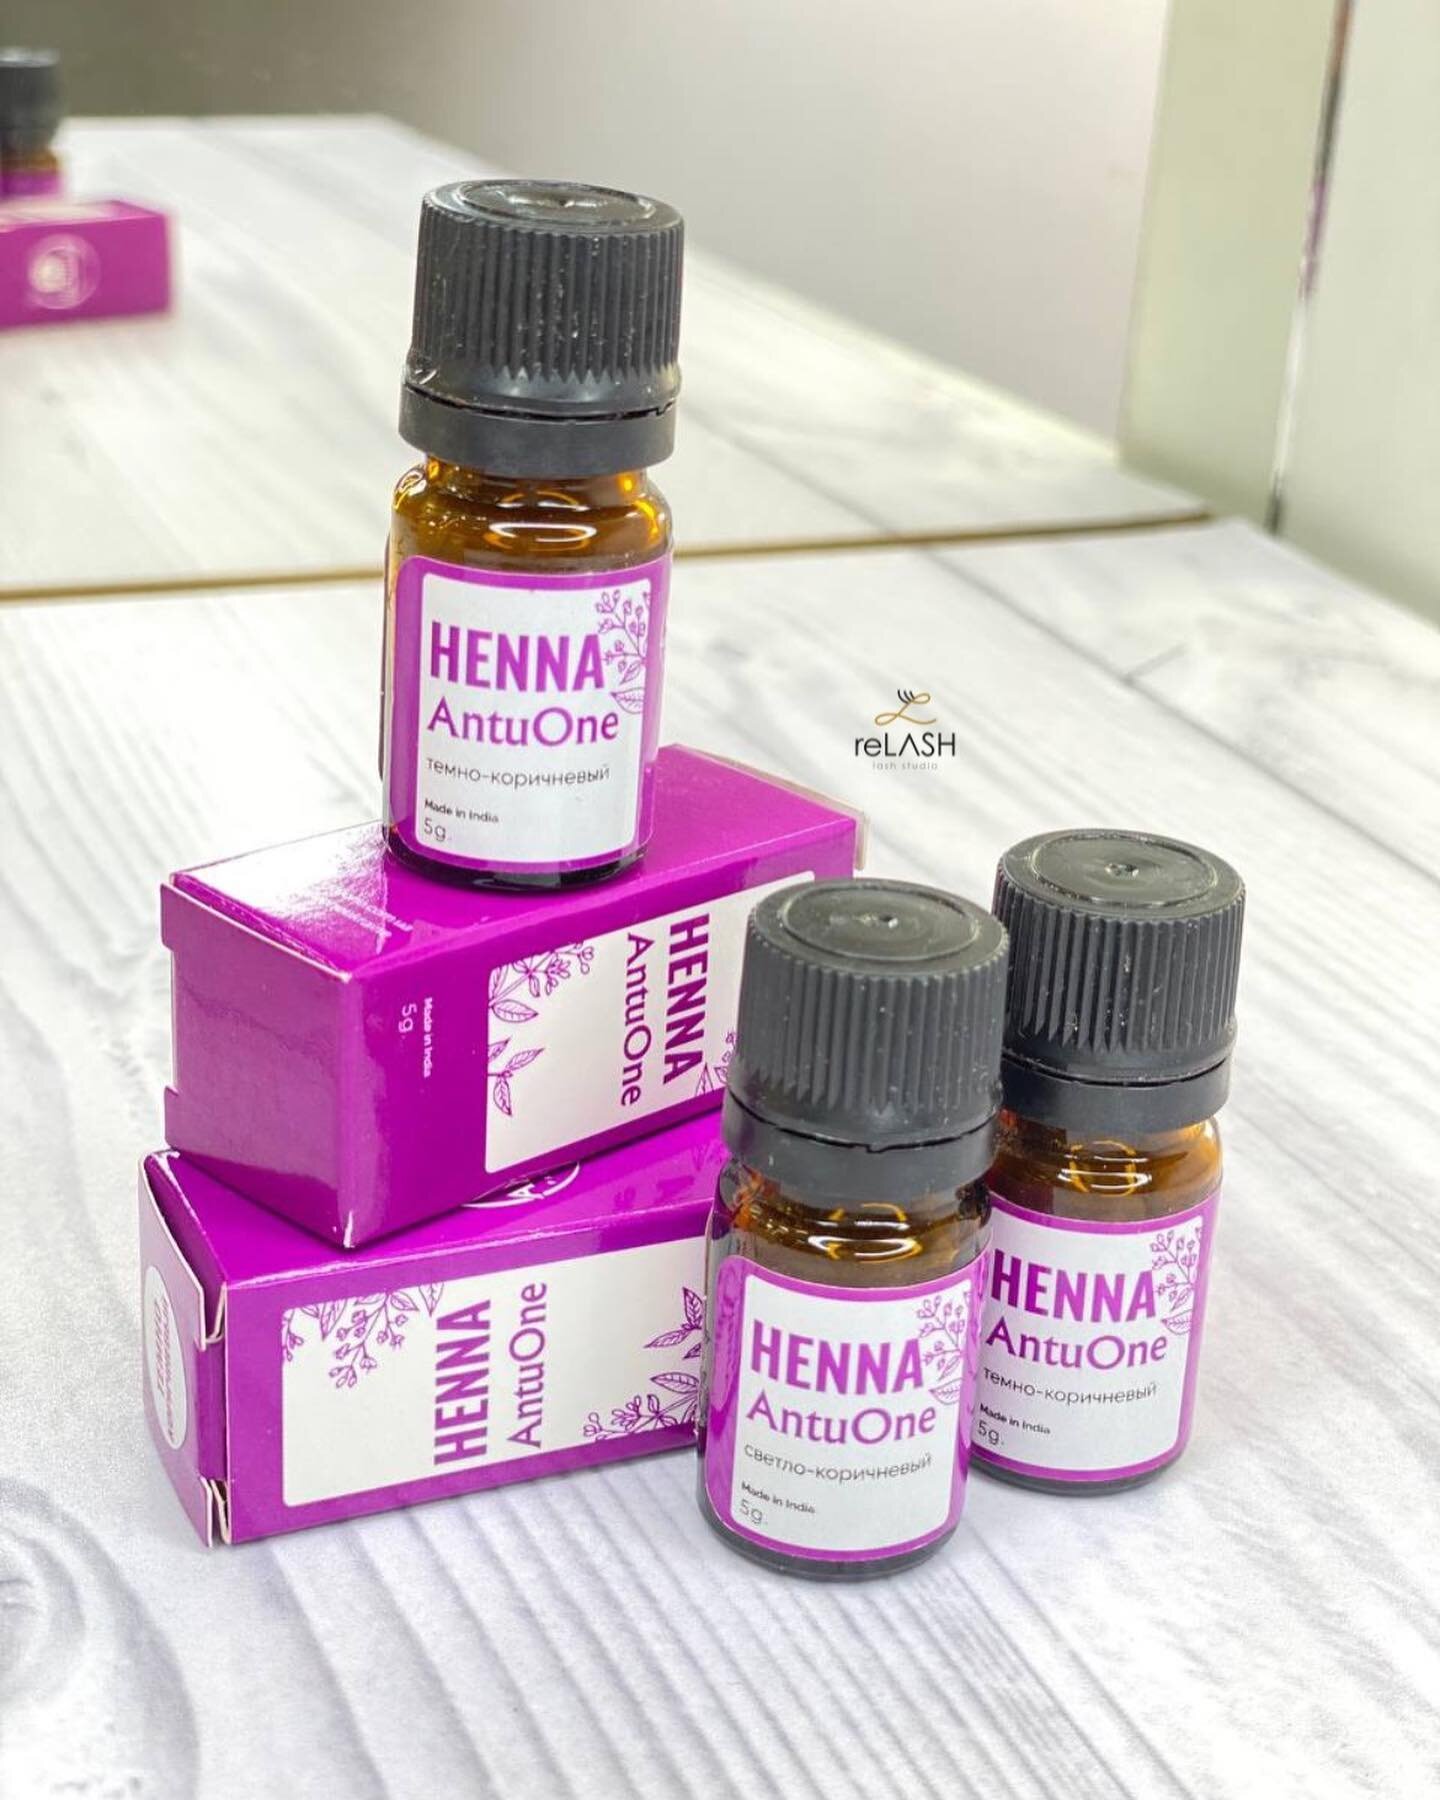 Antuone Henna has arrived!!! 🙌🏻

Exclusively available at @relashco @rebrowshop not sold anywhere else in the United States.

Be the first to try our amazing product! 😁